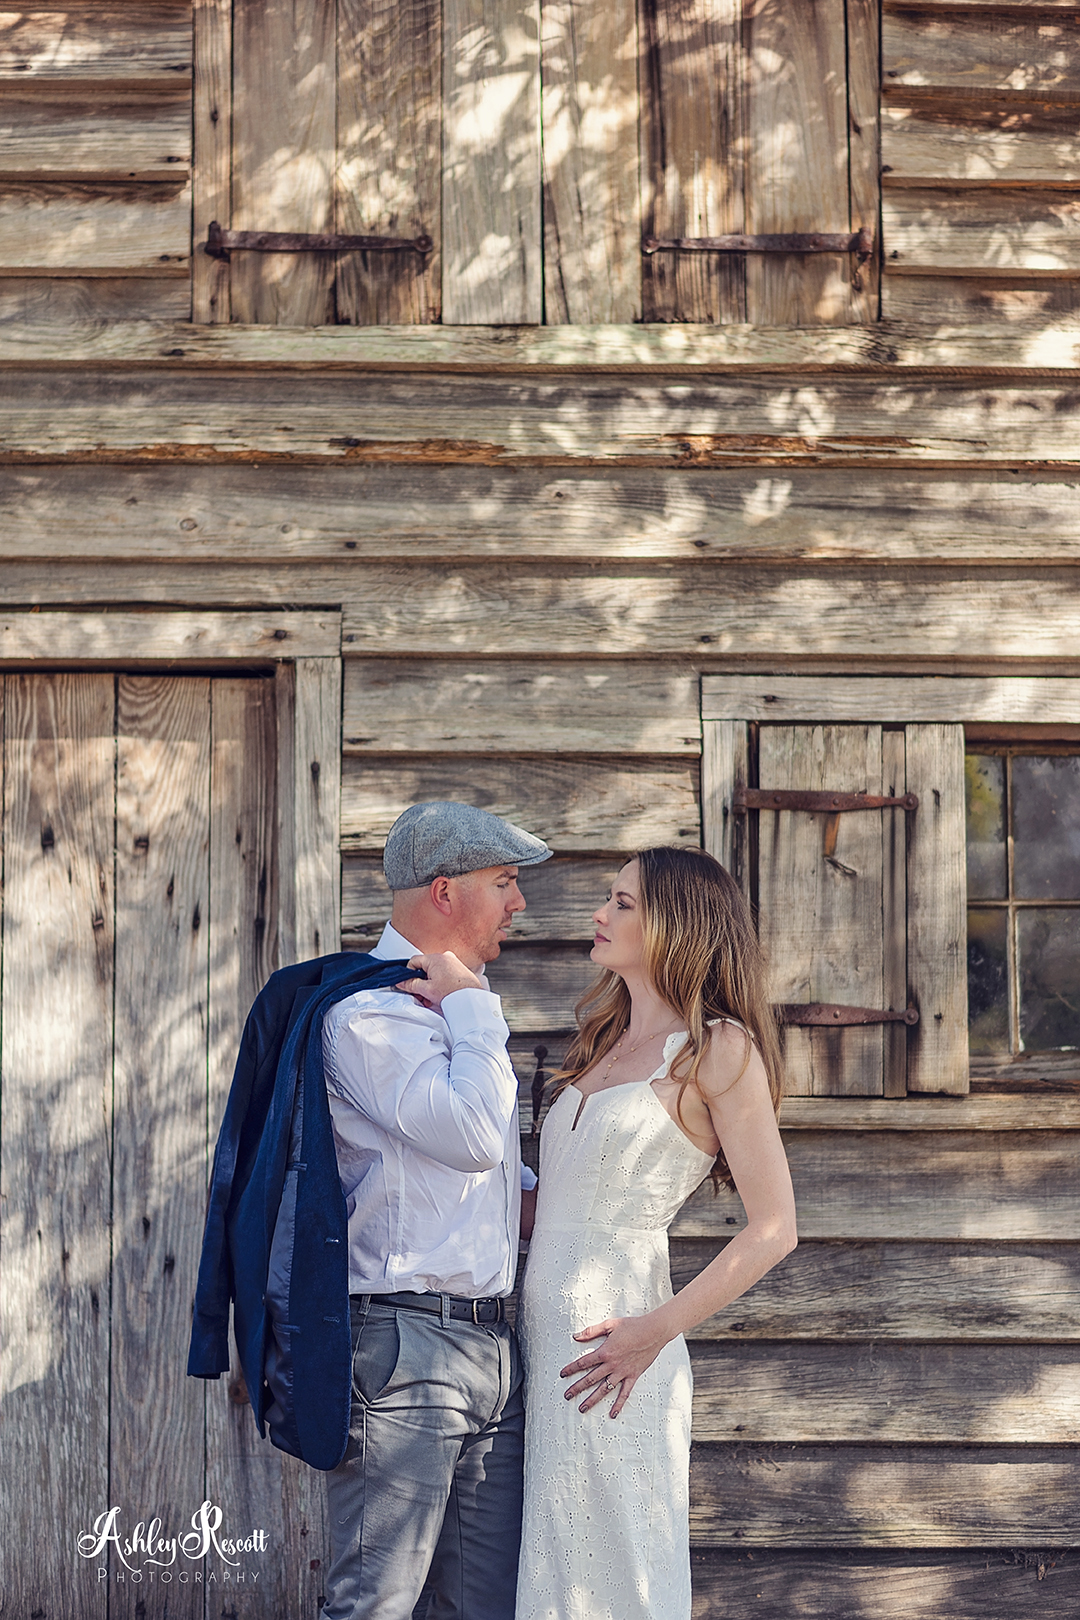 couple in front of wooden building in dappled light